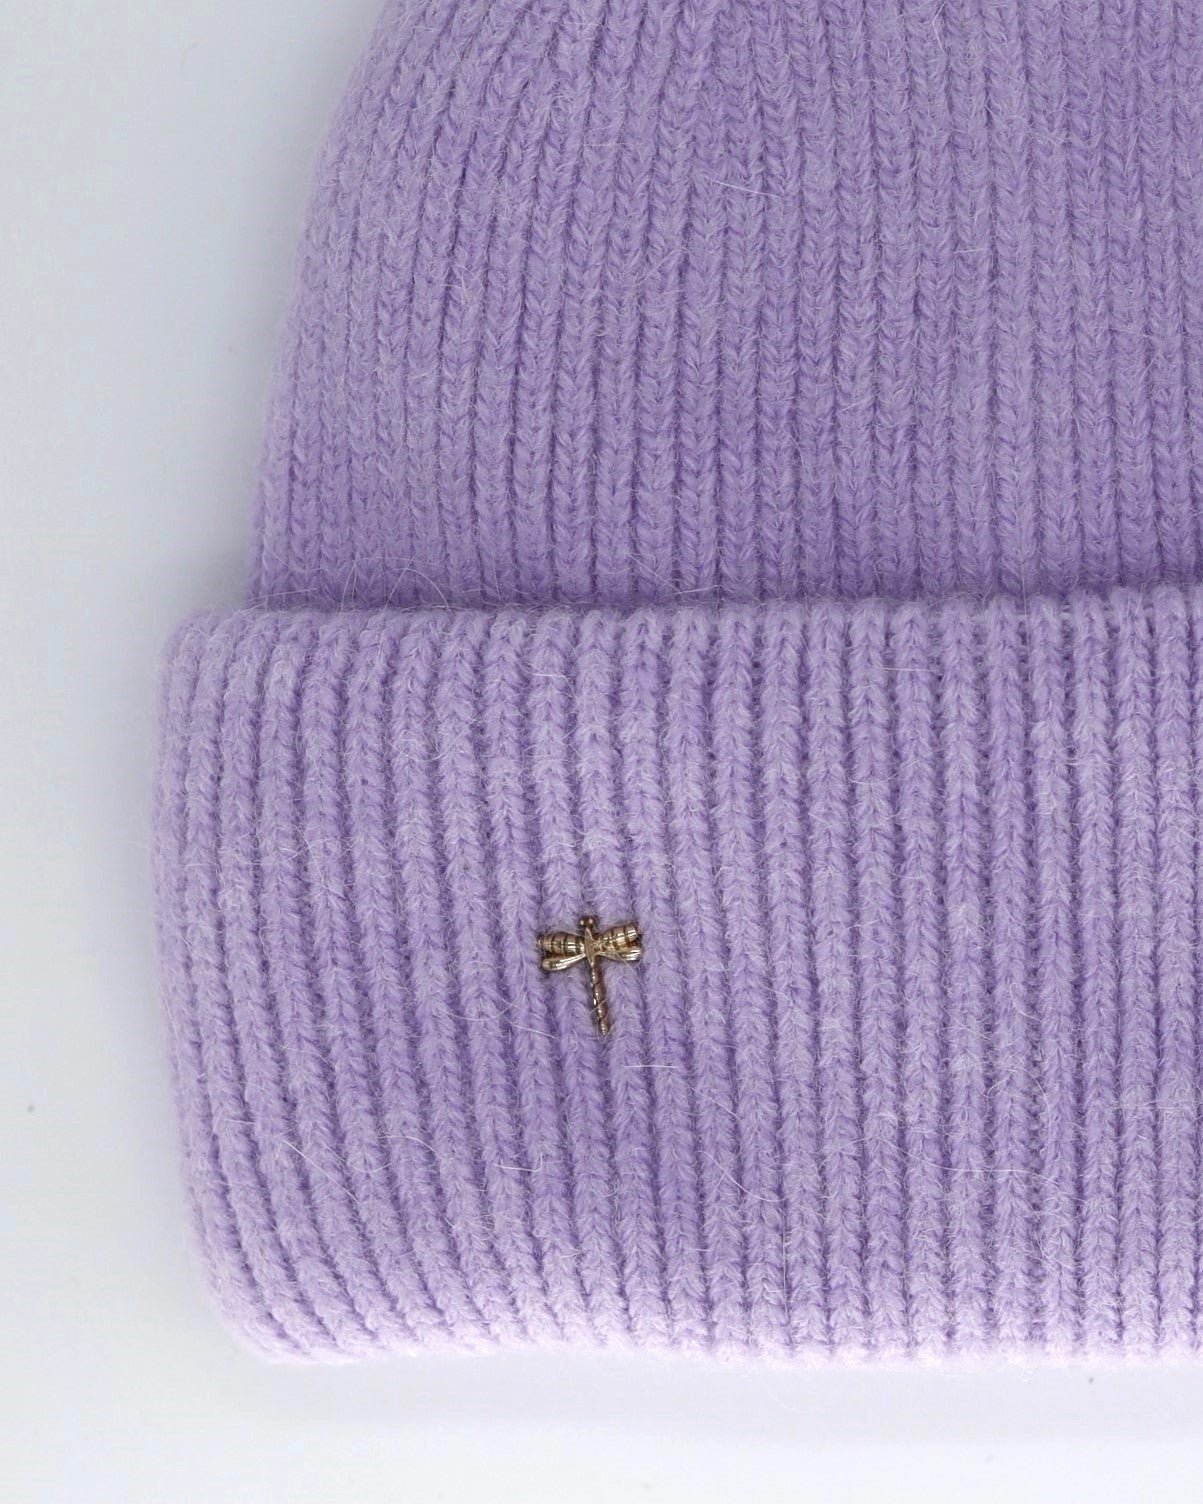 This Hat is a finest hat with a classic silhouette from Villanelle. A luxurious accessory for women made from the softest natural angora and sheep wool for extreme comfort and warmth. It is made in a trendy lavender color accompanied by an elegant pin. This product is sourced and manufactured in Poland.